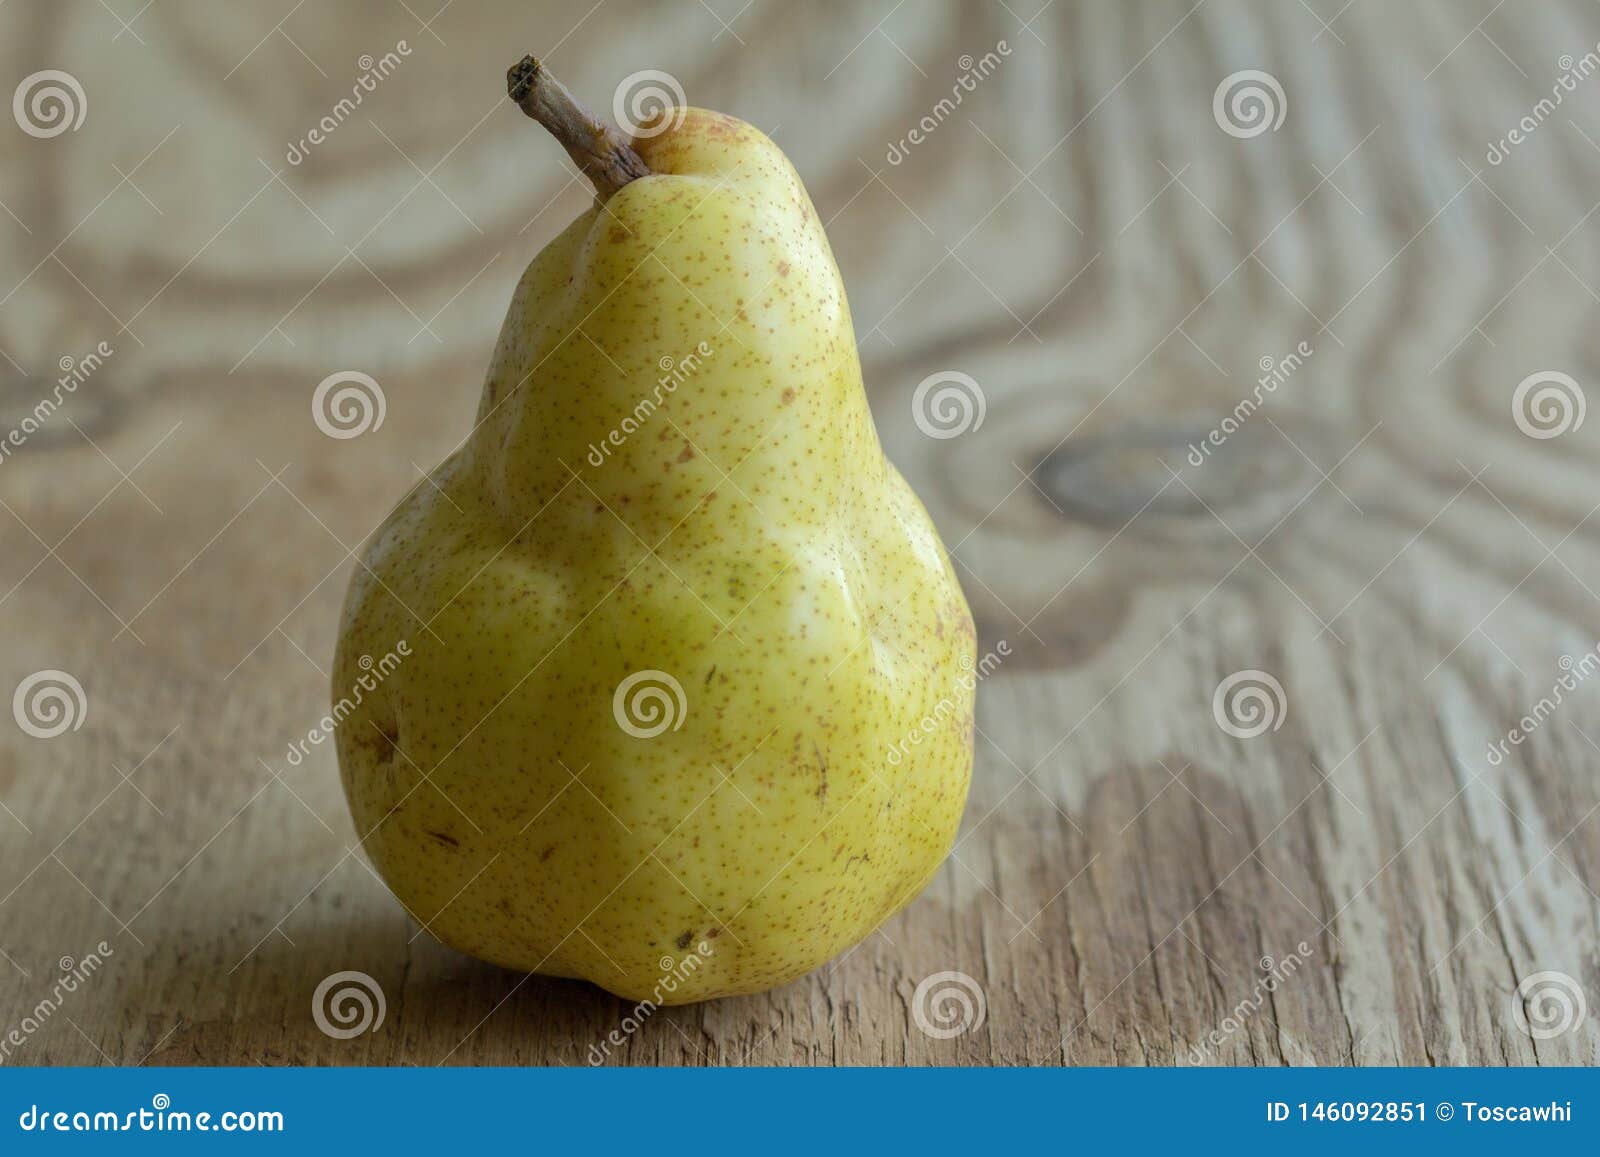 Organic Fresh Pears Table Stock Photo by ©Dream79 582602060